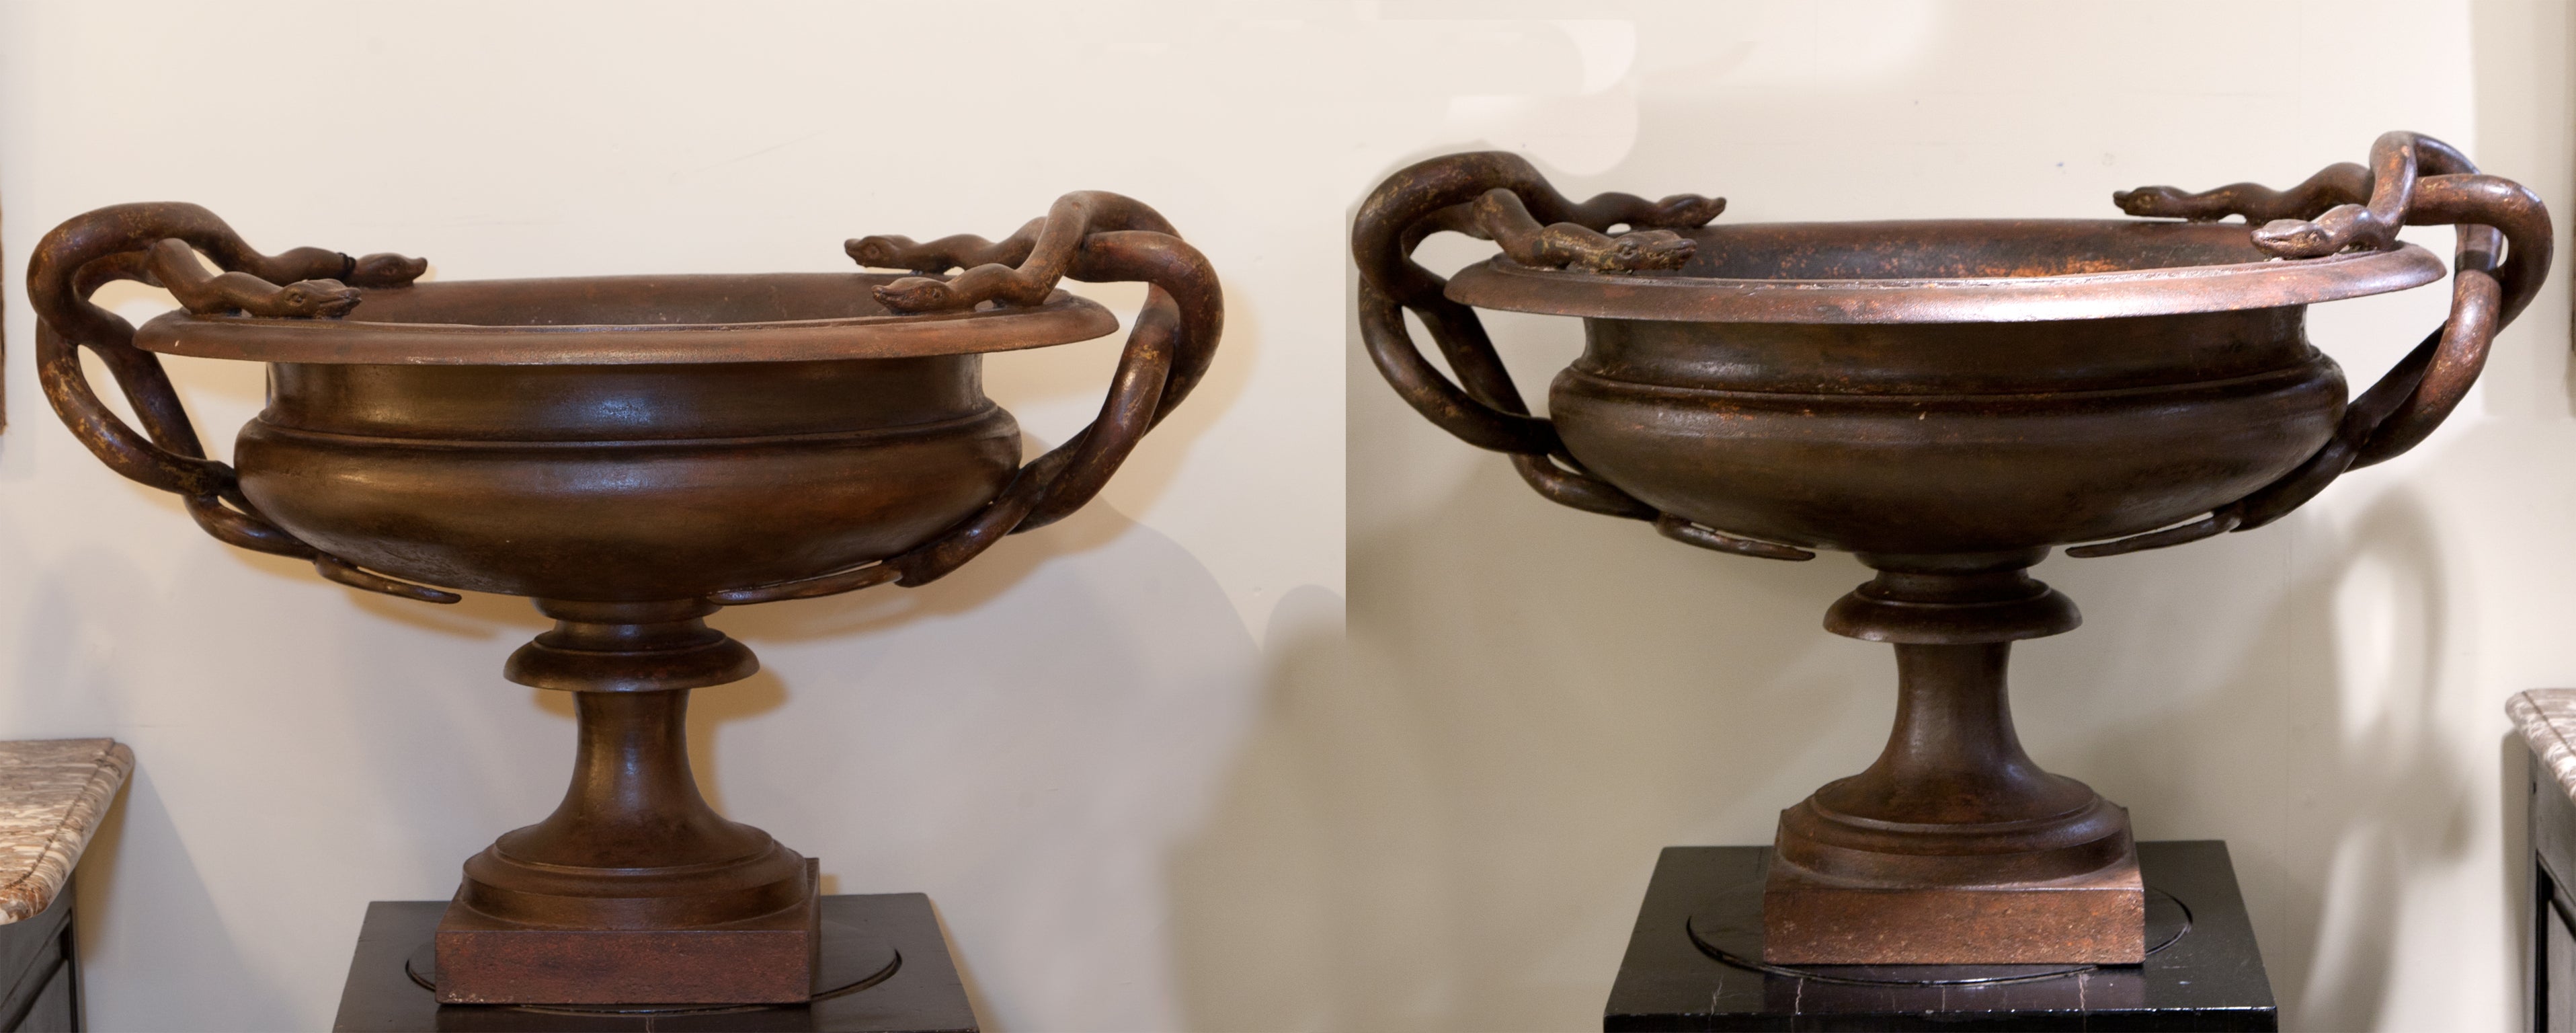 A Pair of Cast Iron Urns Decorated with Snakes